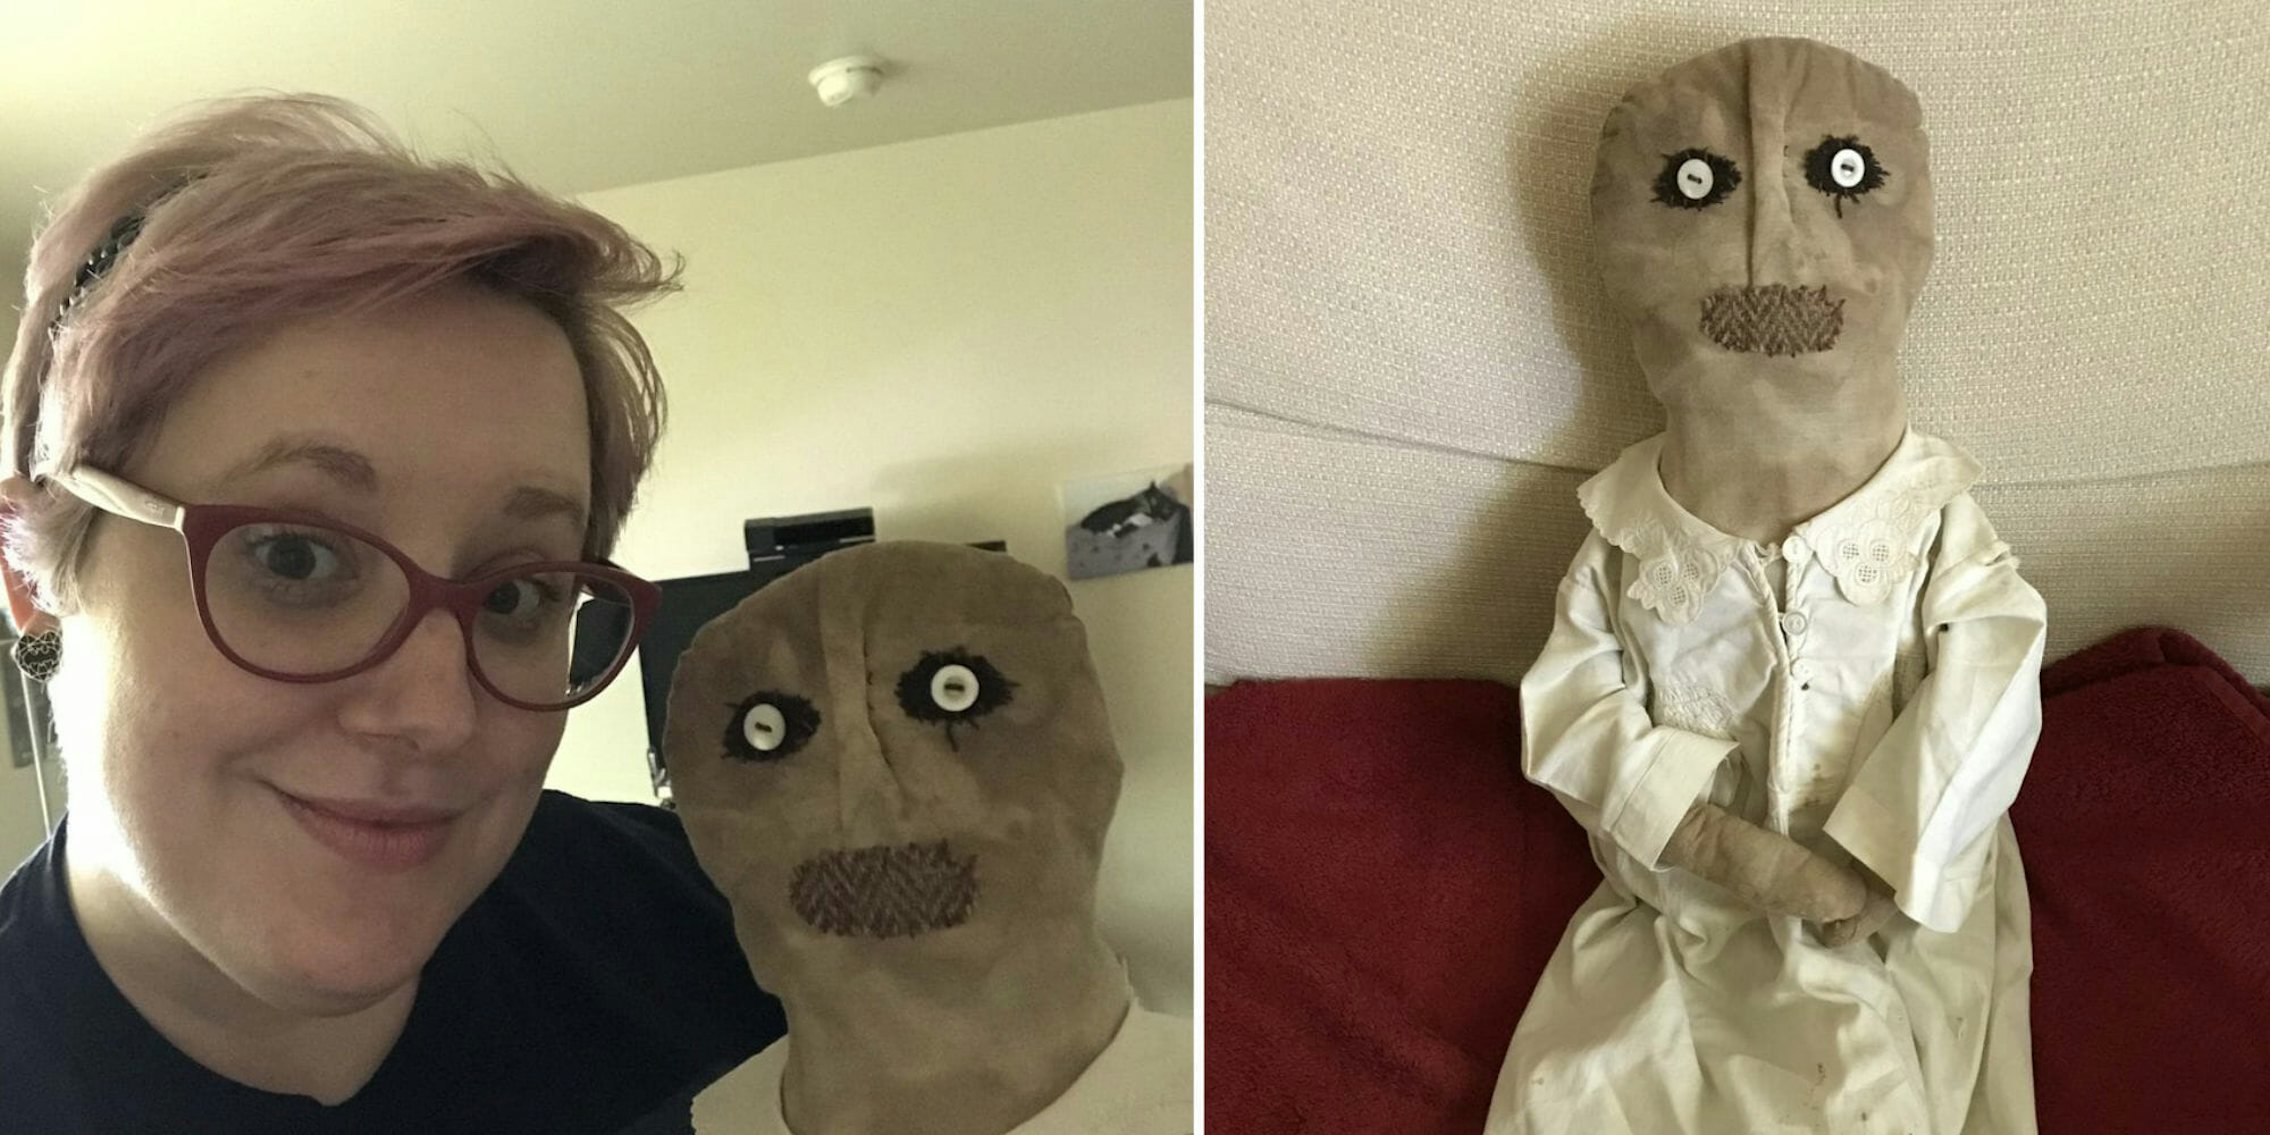 Abigail the Haunted Doll Goes Viral After Woman Shares Photos on Twitter